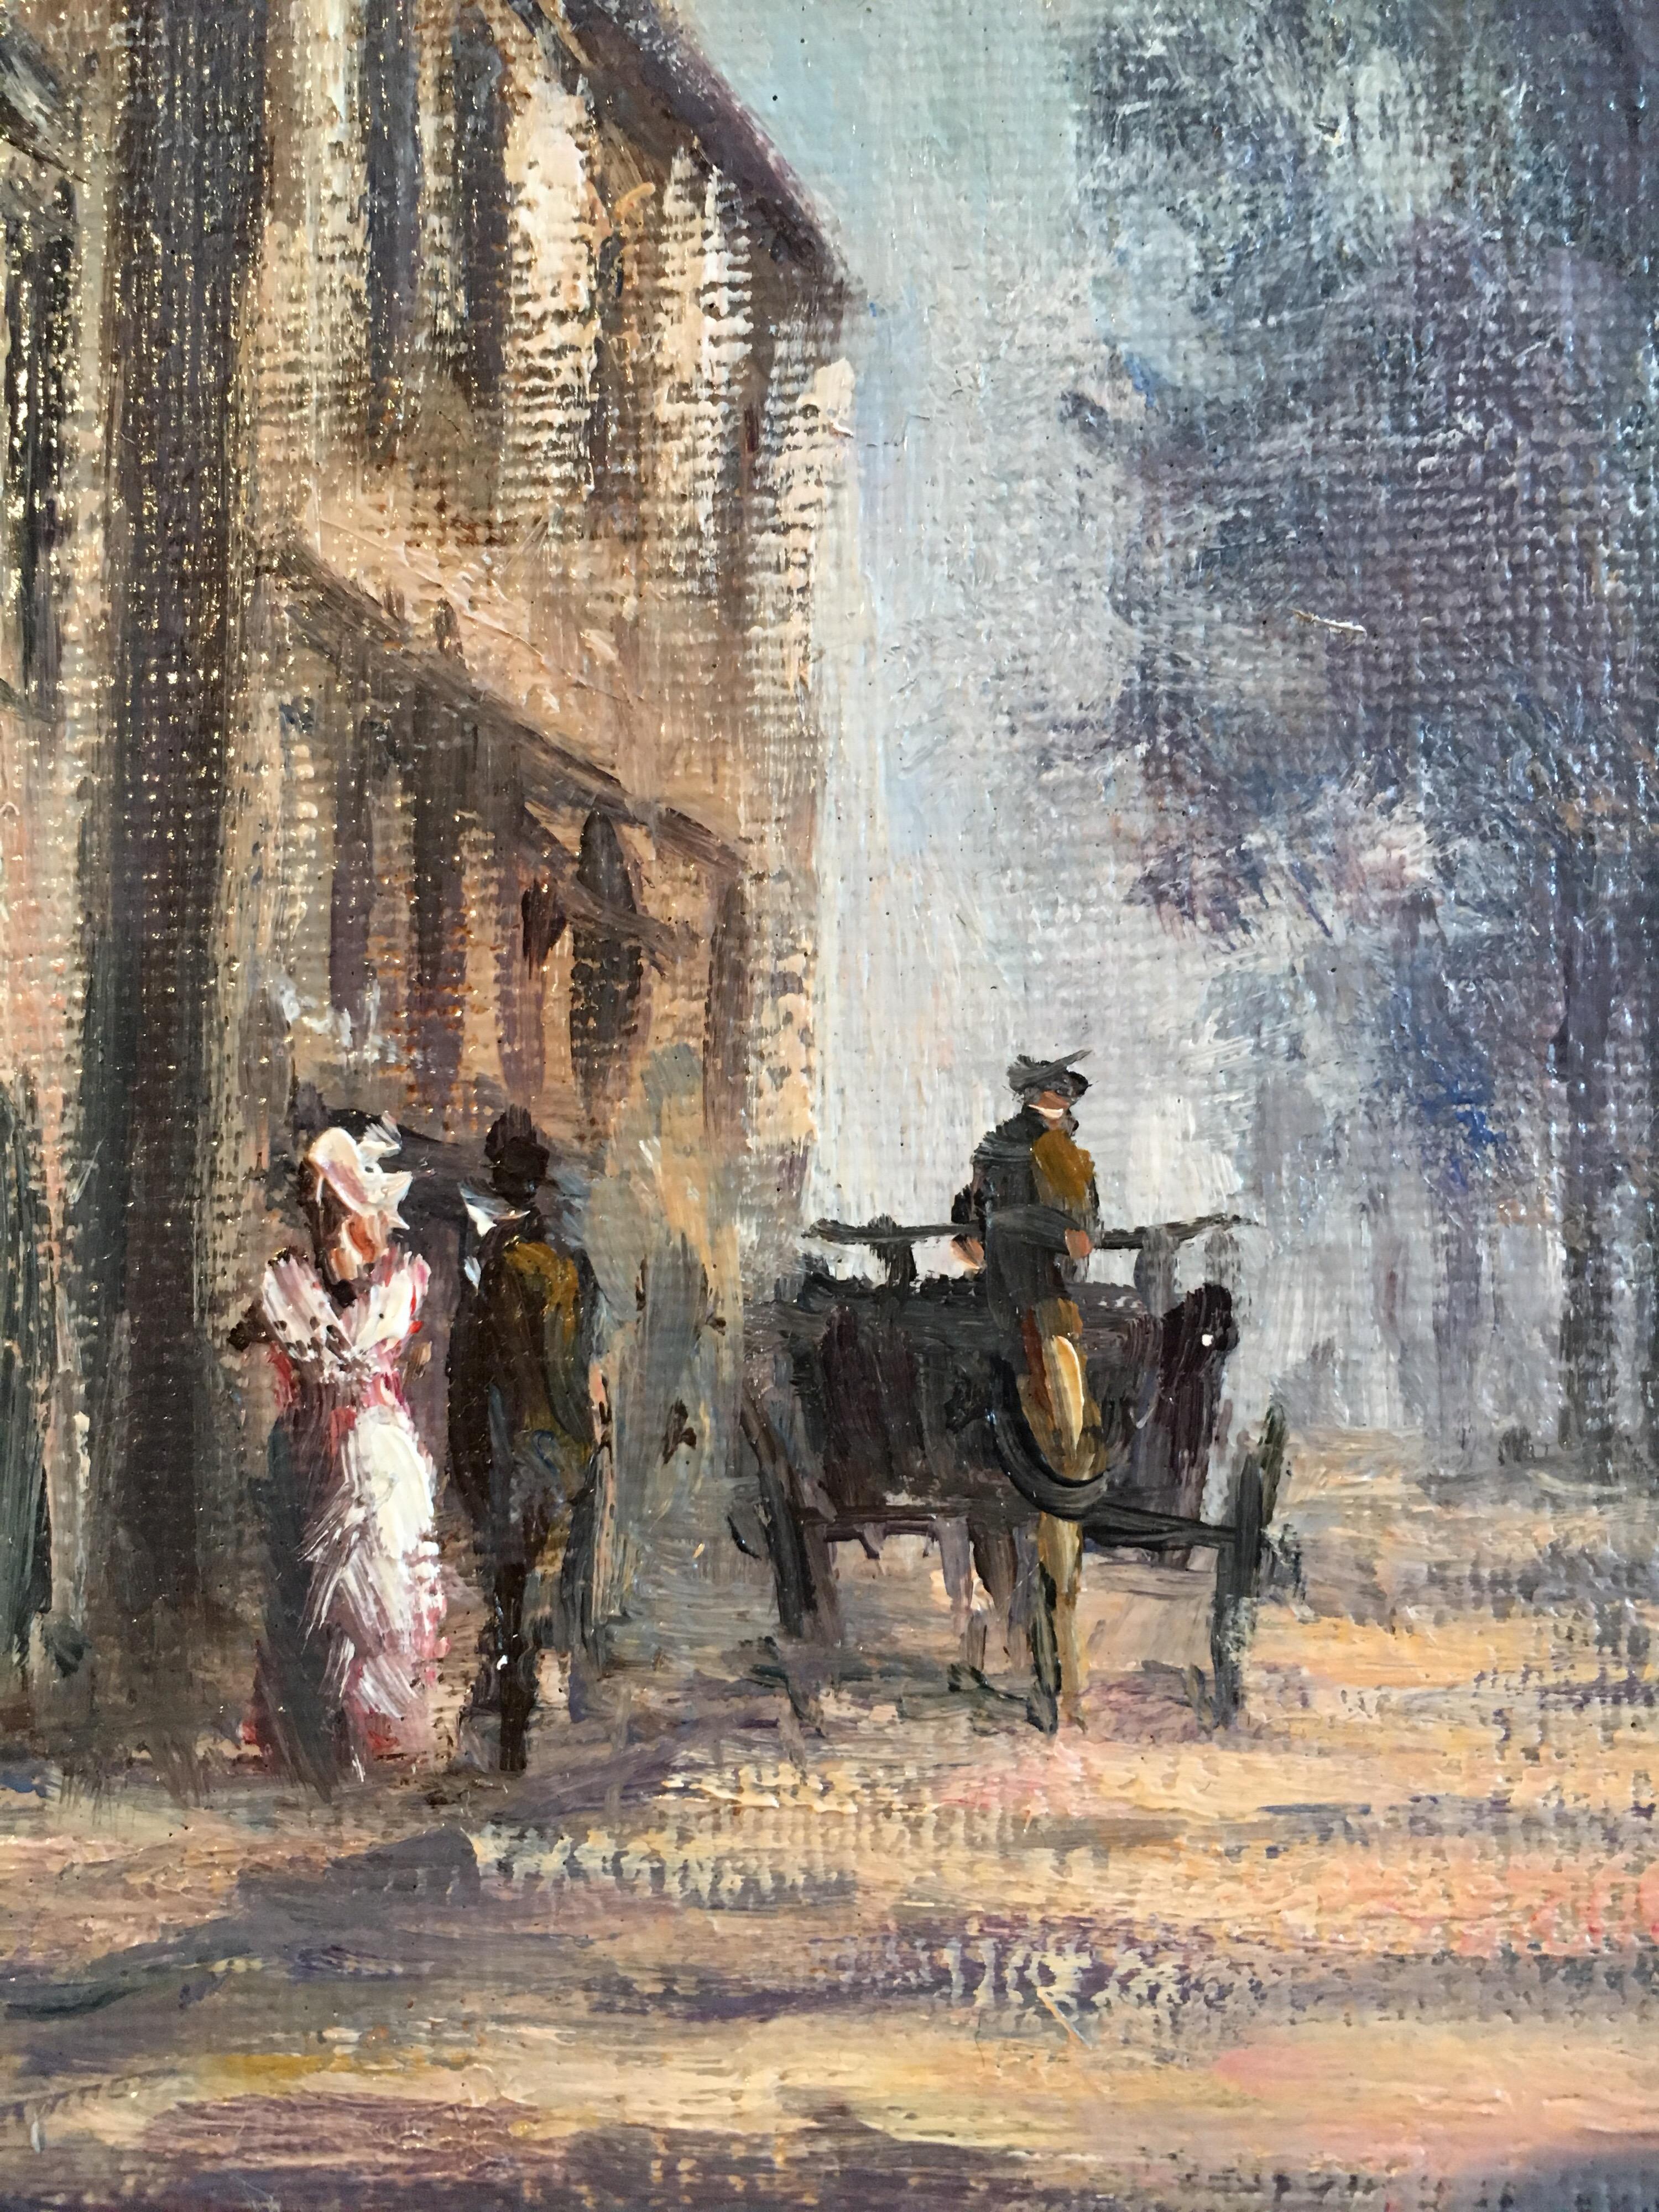 Dappled Light, Impressionist City Scene, Signed Oil Painting
By British artist, Anthony Hedges, 20th Century
Signed by the artist on the lower left hand corner
Oil painting on canvas, unframed
Canvas size: 12 x 16 inches

Beautiful scene of a city